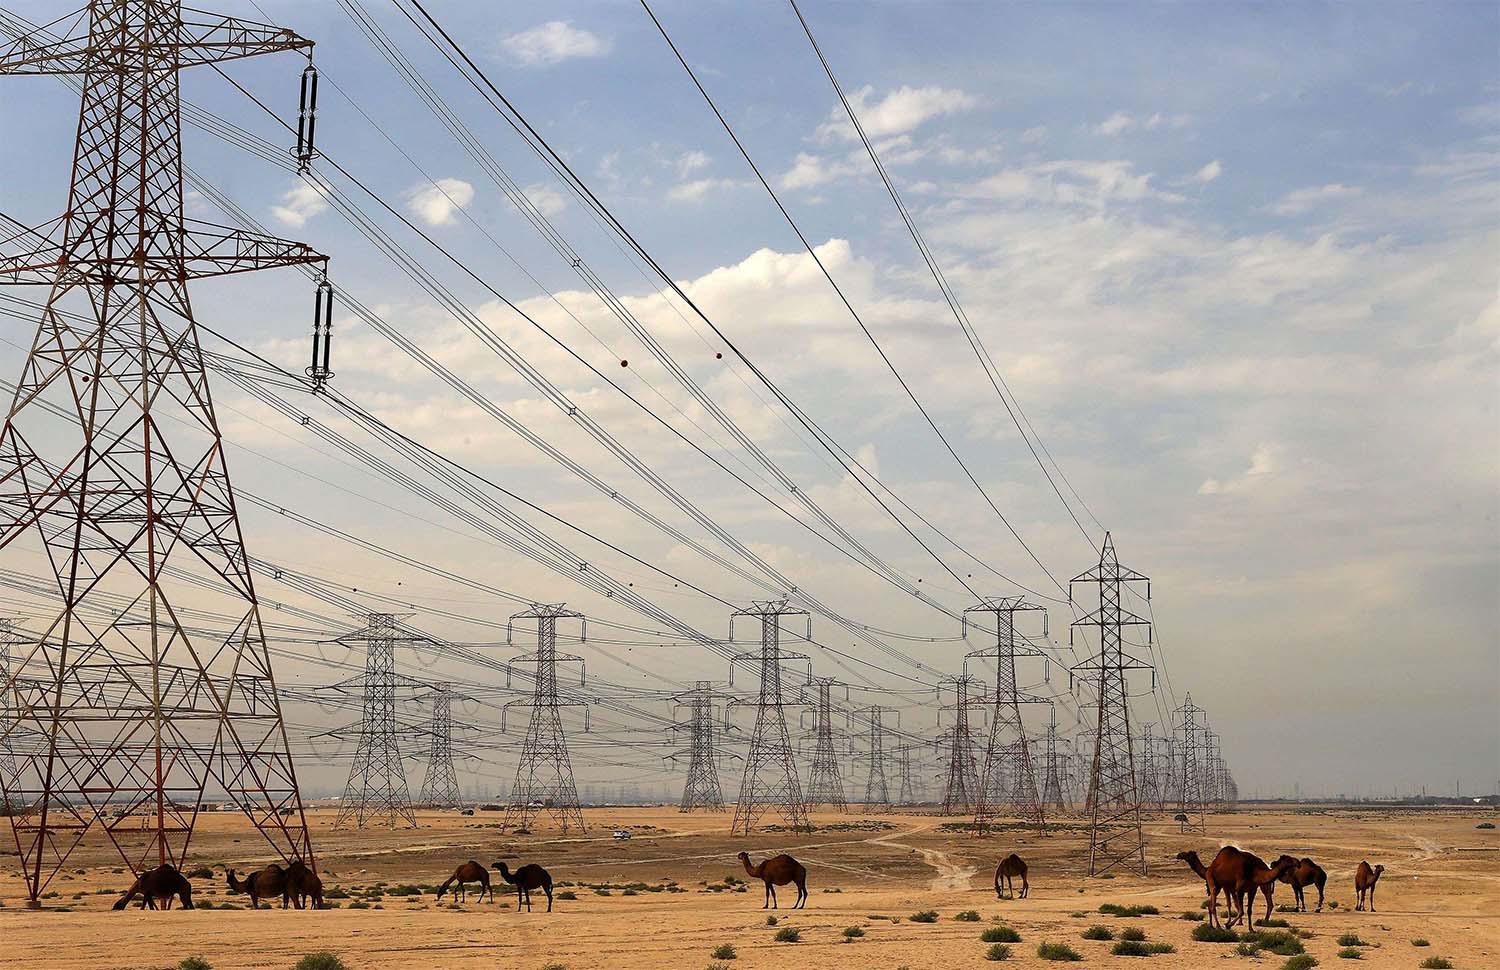 Kuwait has plans to generate 15 percent of its energy via renewable sources by 2030